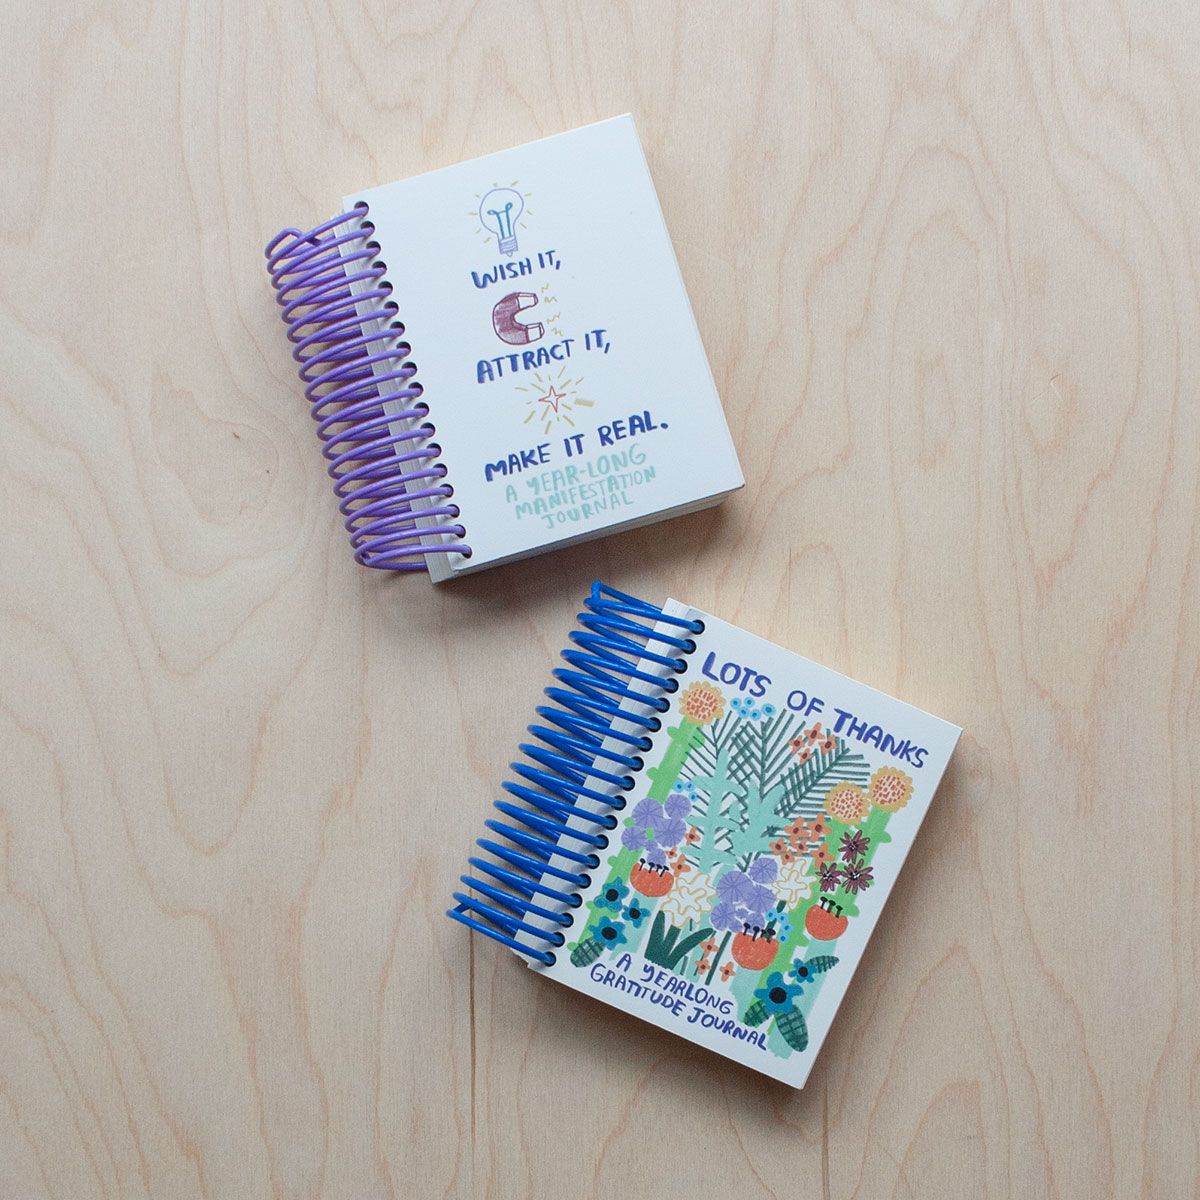 Two spiral-bound journals on a wooden surface: one with a purple coil titled "Wish it, Attract it, Make it Real," and another with a blue coil titled "Lots of Thanks" featuring floral illustrations.